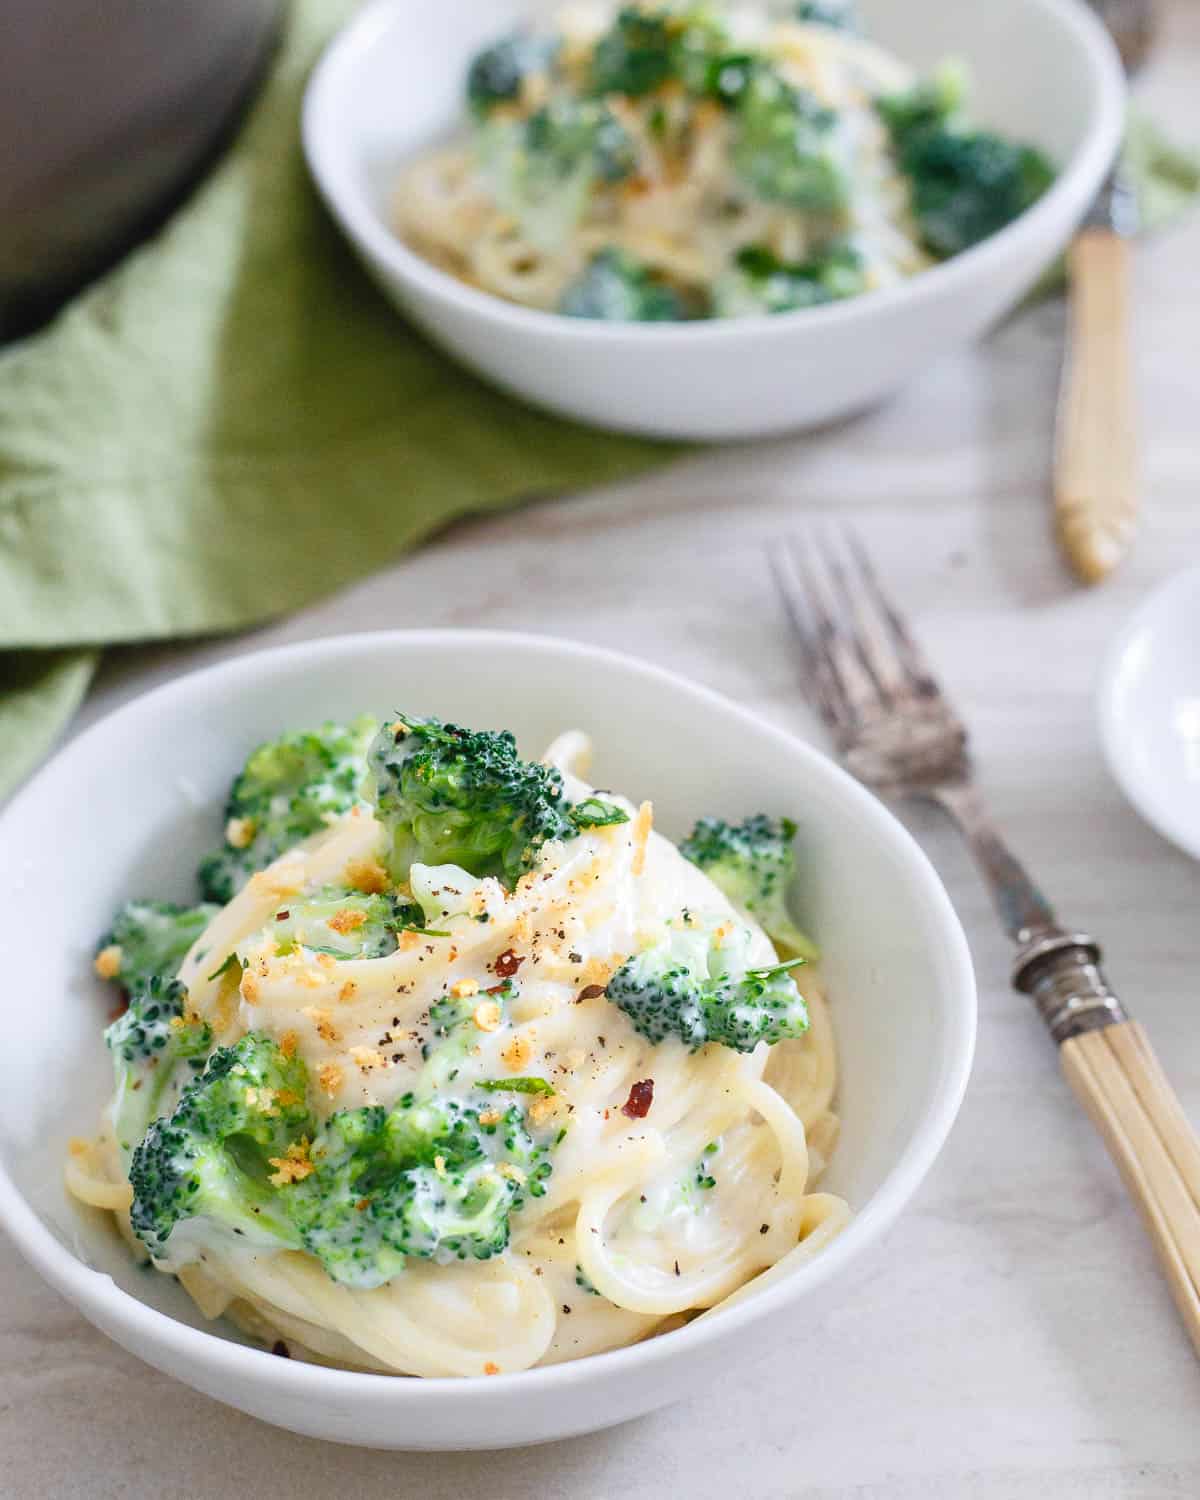 This lightened up spaghetti alfredo with broccoli is creamy, cheesy and decadent but much healthier than the original so you can feel good about eating it.